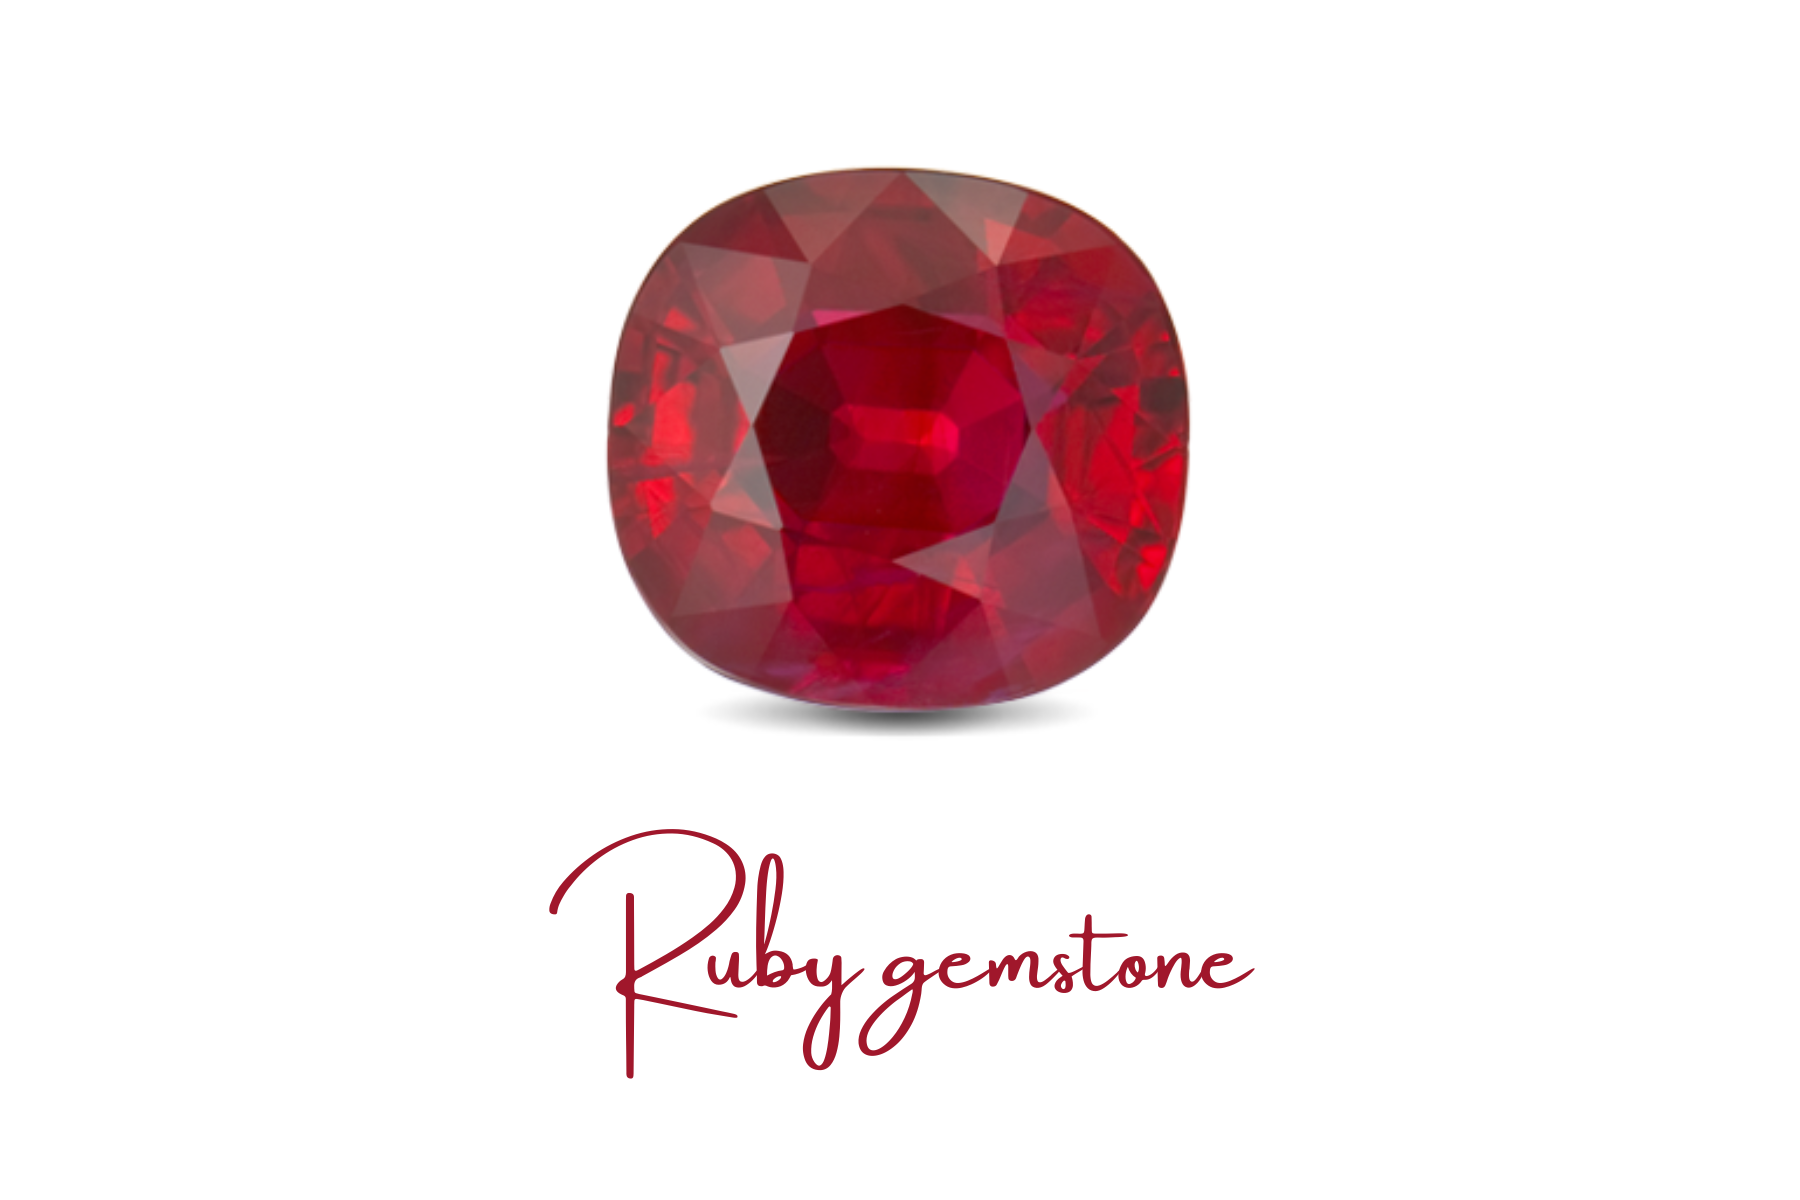 Smooth-cornered square red ruby stone